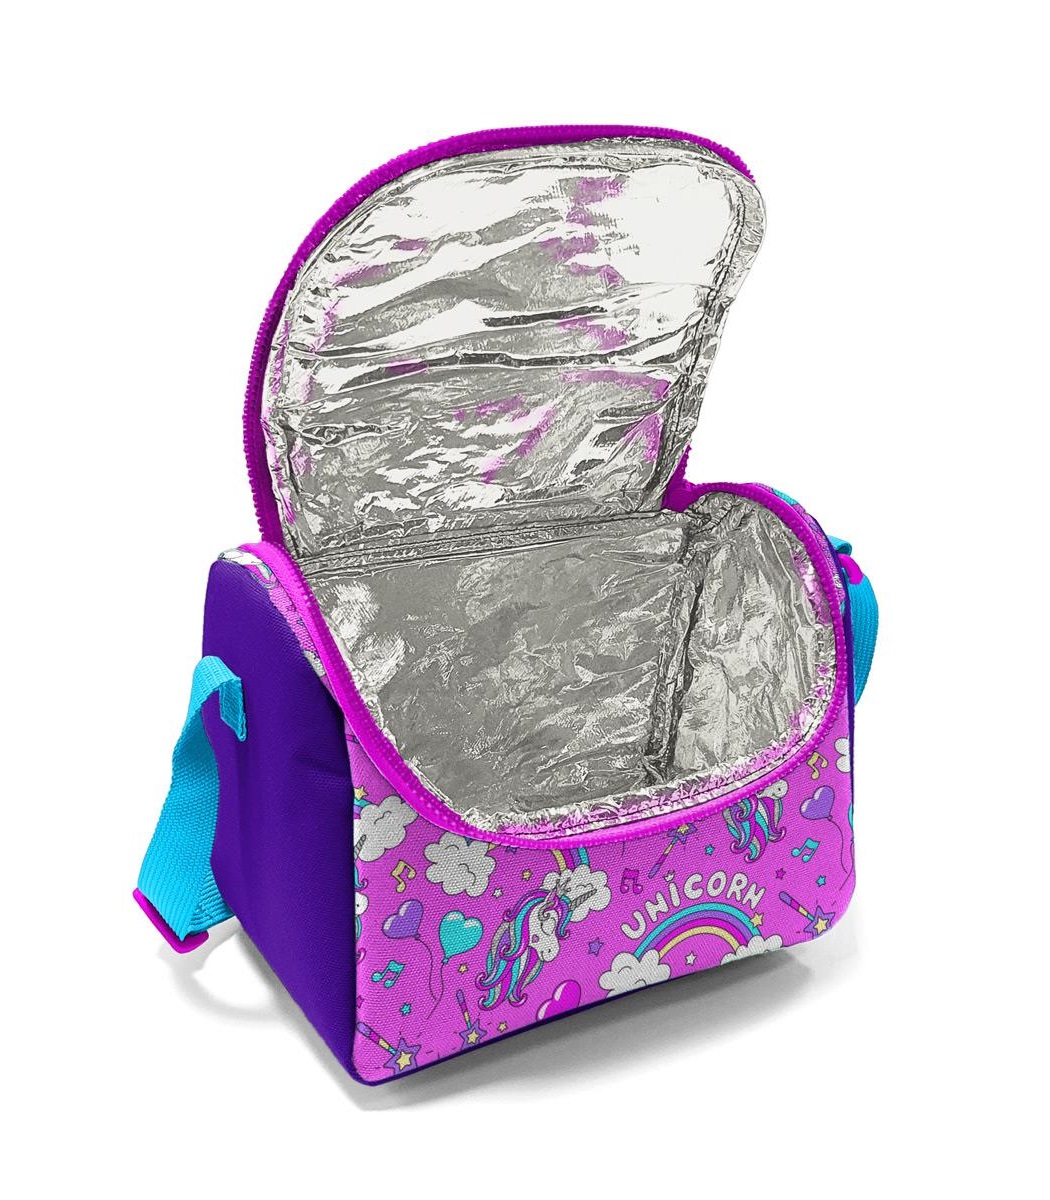 Coral High Kids Thermal Lunch Bag - Purple Light Pink Unicorn Patterned